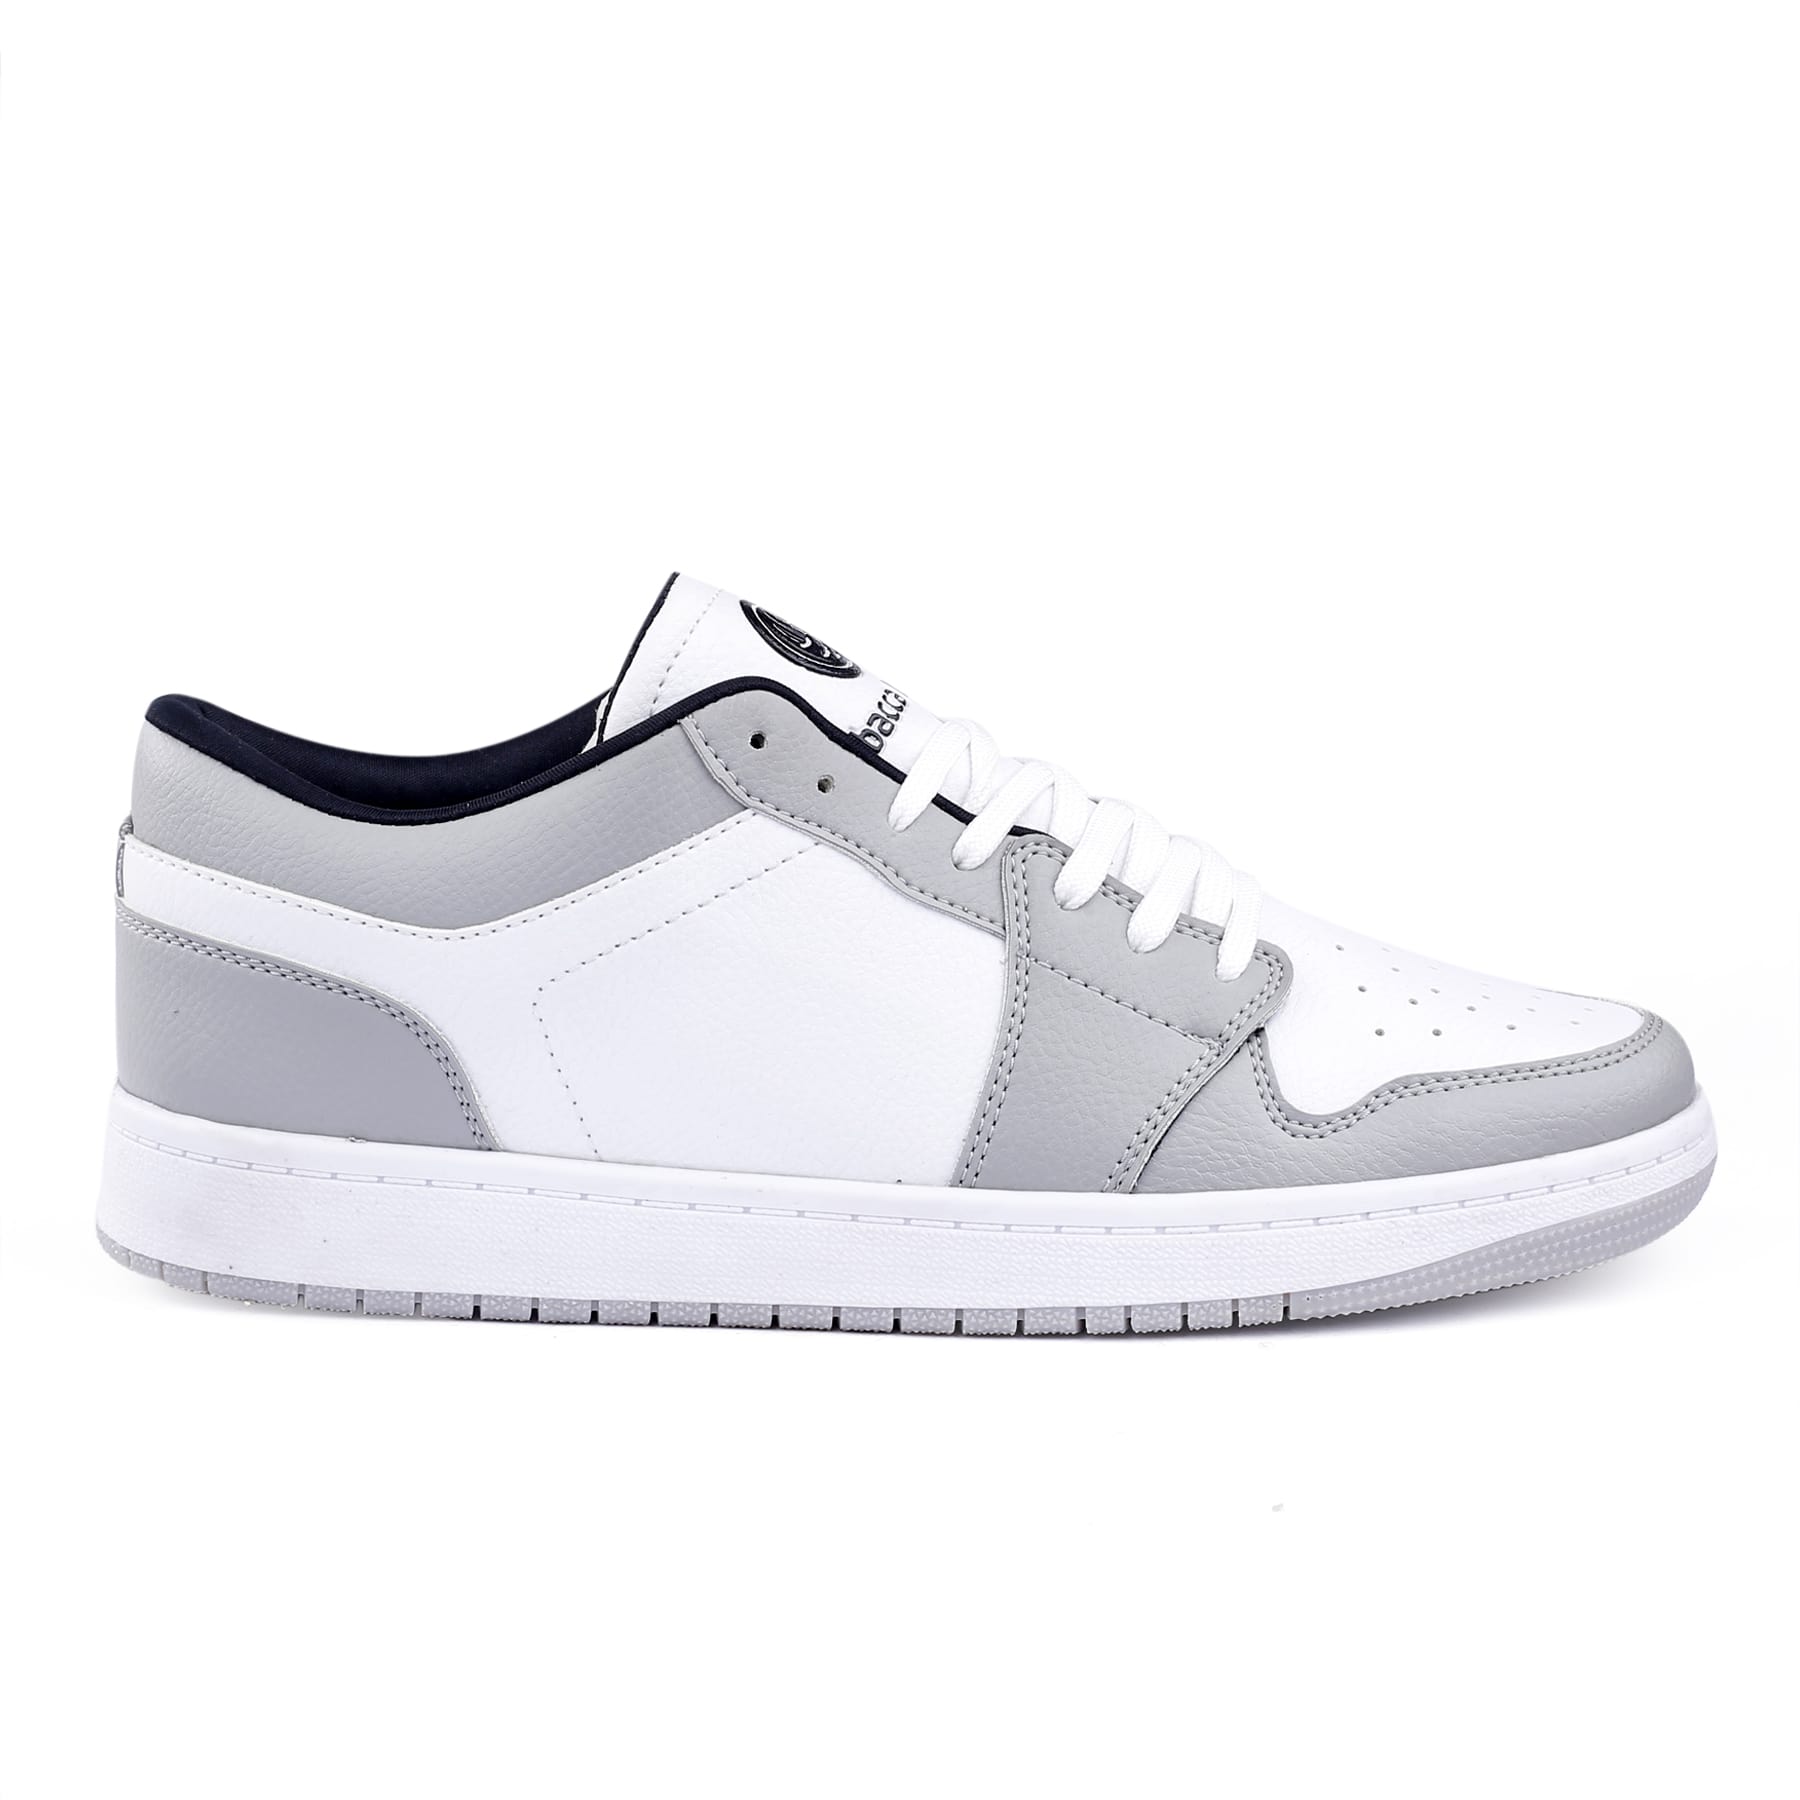 Bacca Bucci GOOSE Low top Classic Sneakers | Casual Shoes for Men